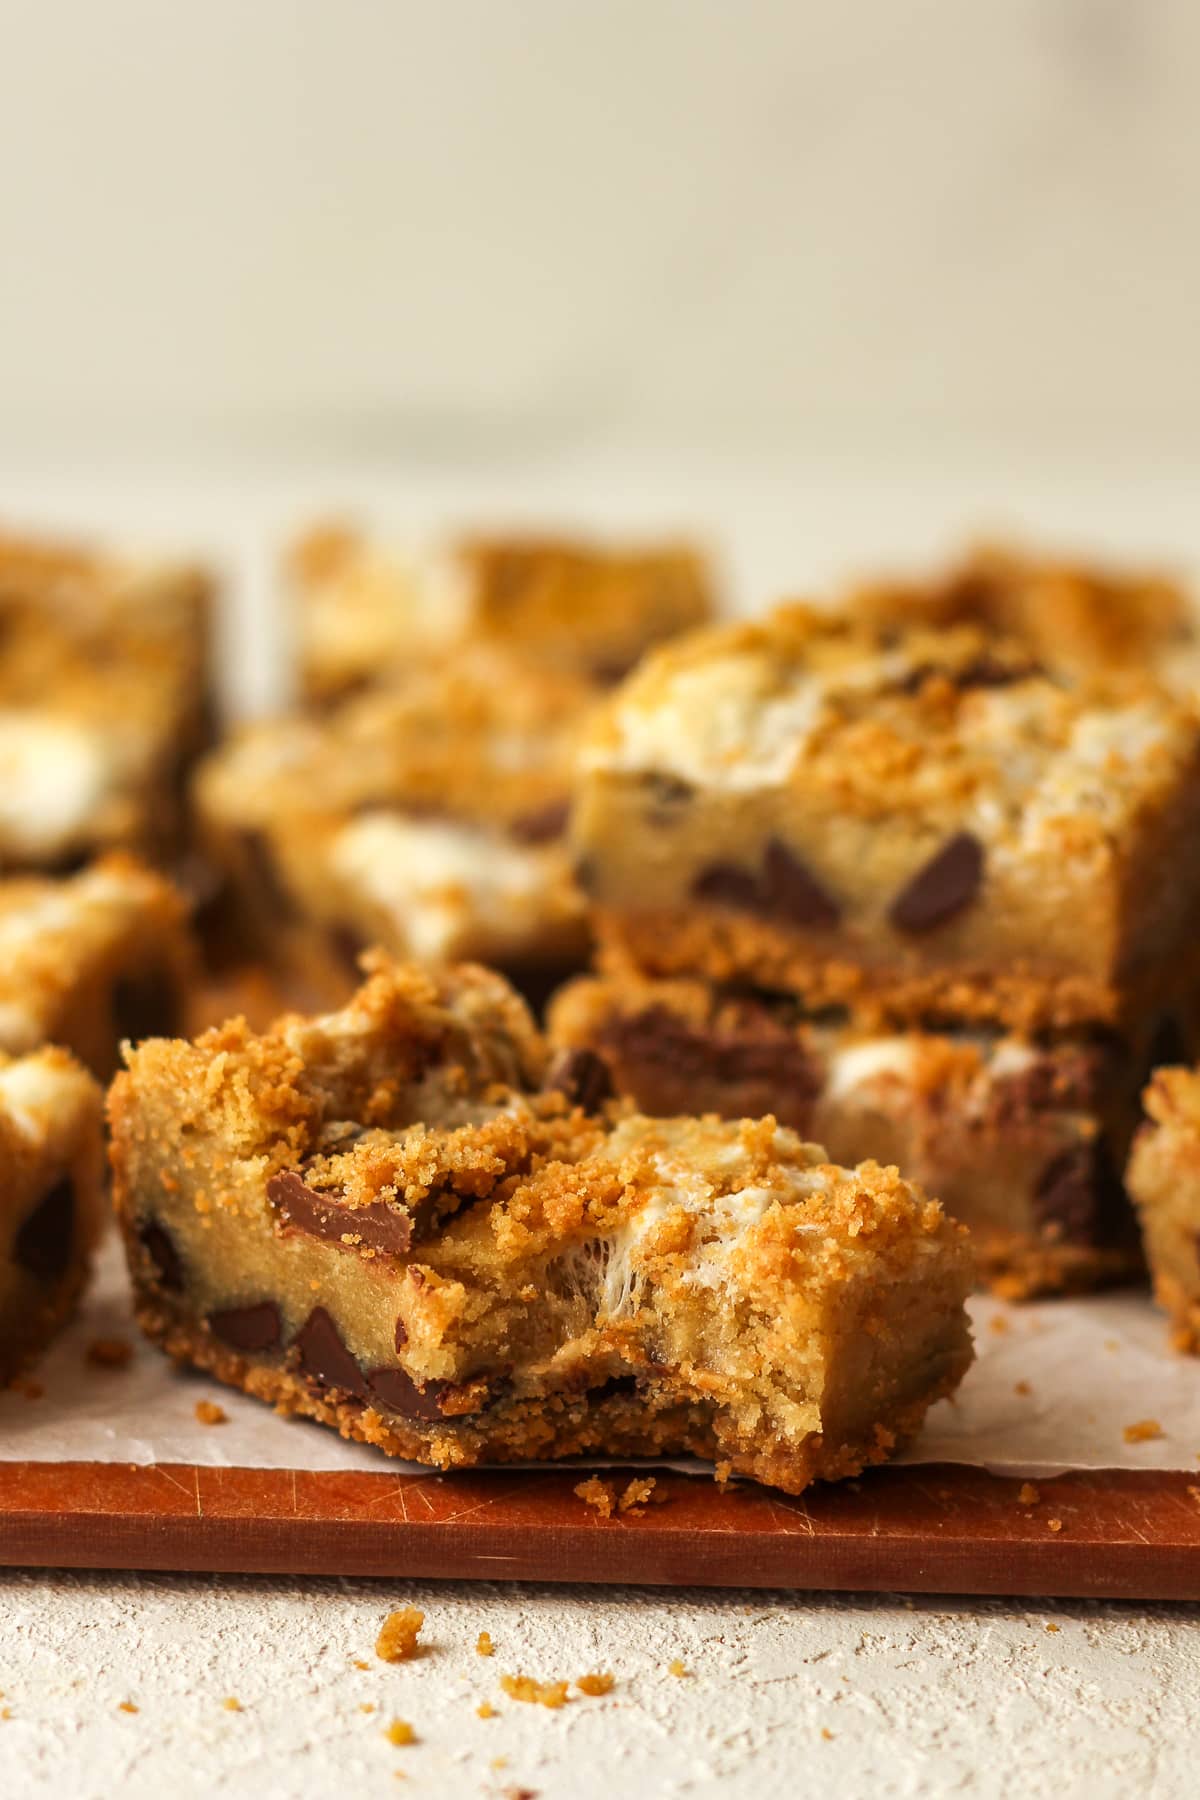 Side view of a s'mores cookie bar with a bite out of it and other bars in the background.